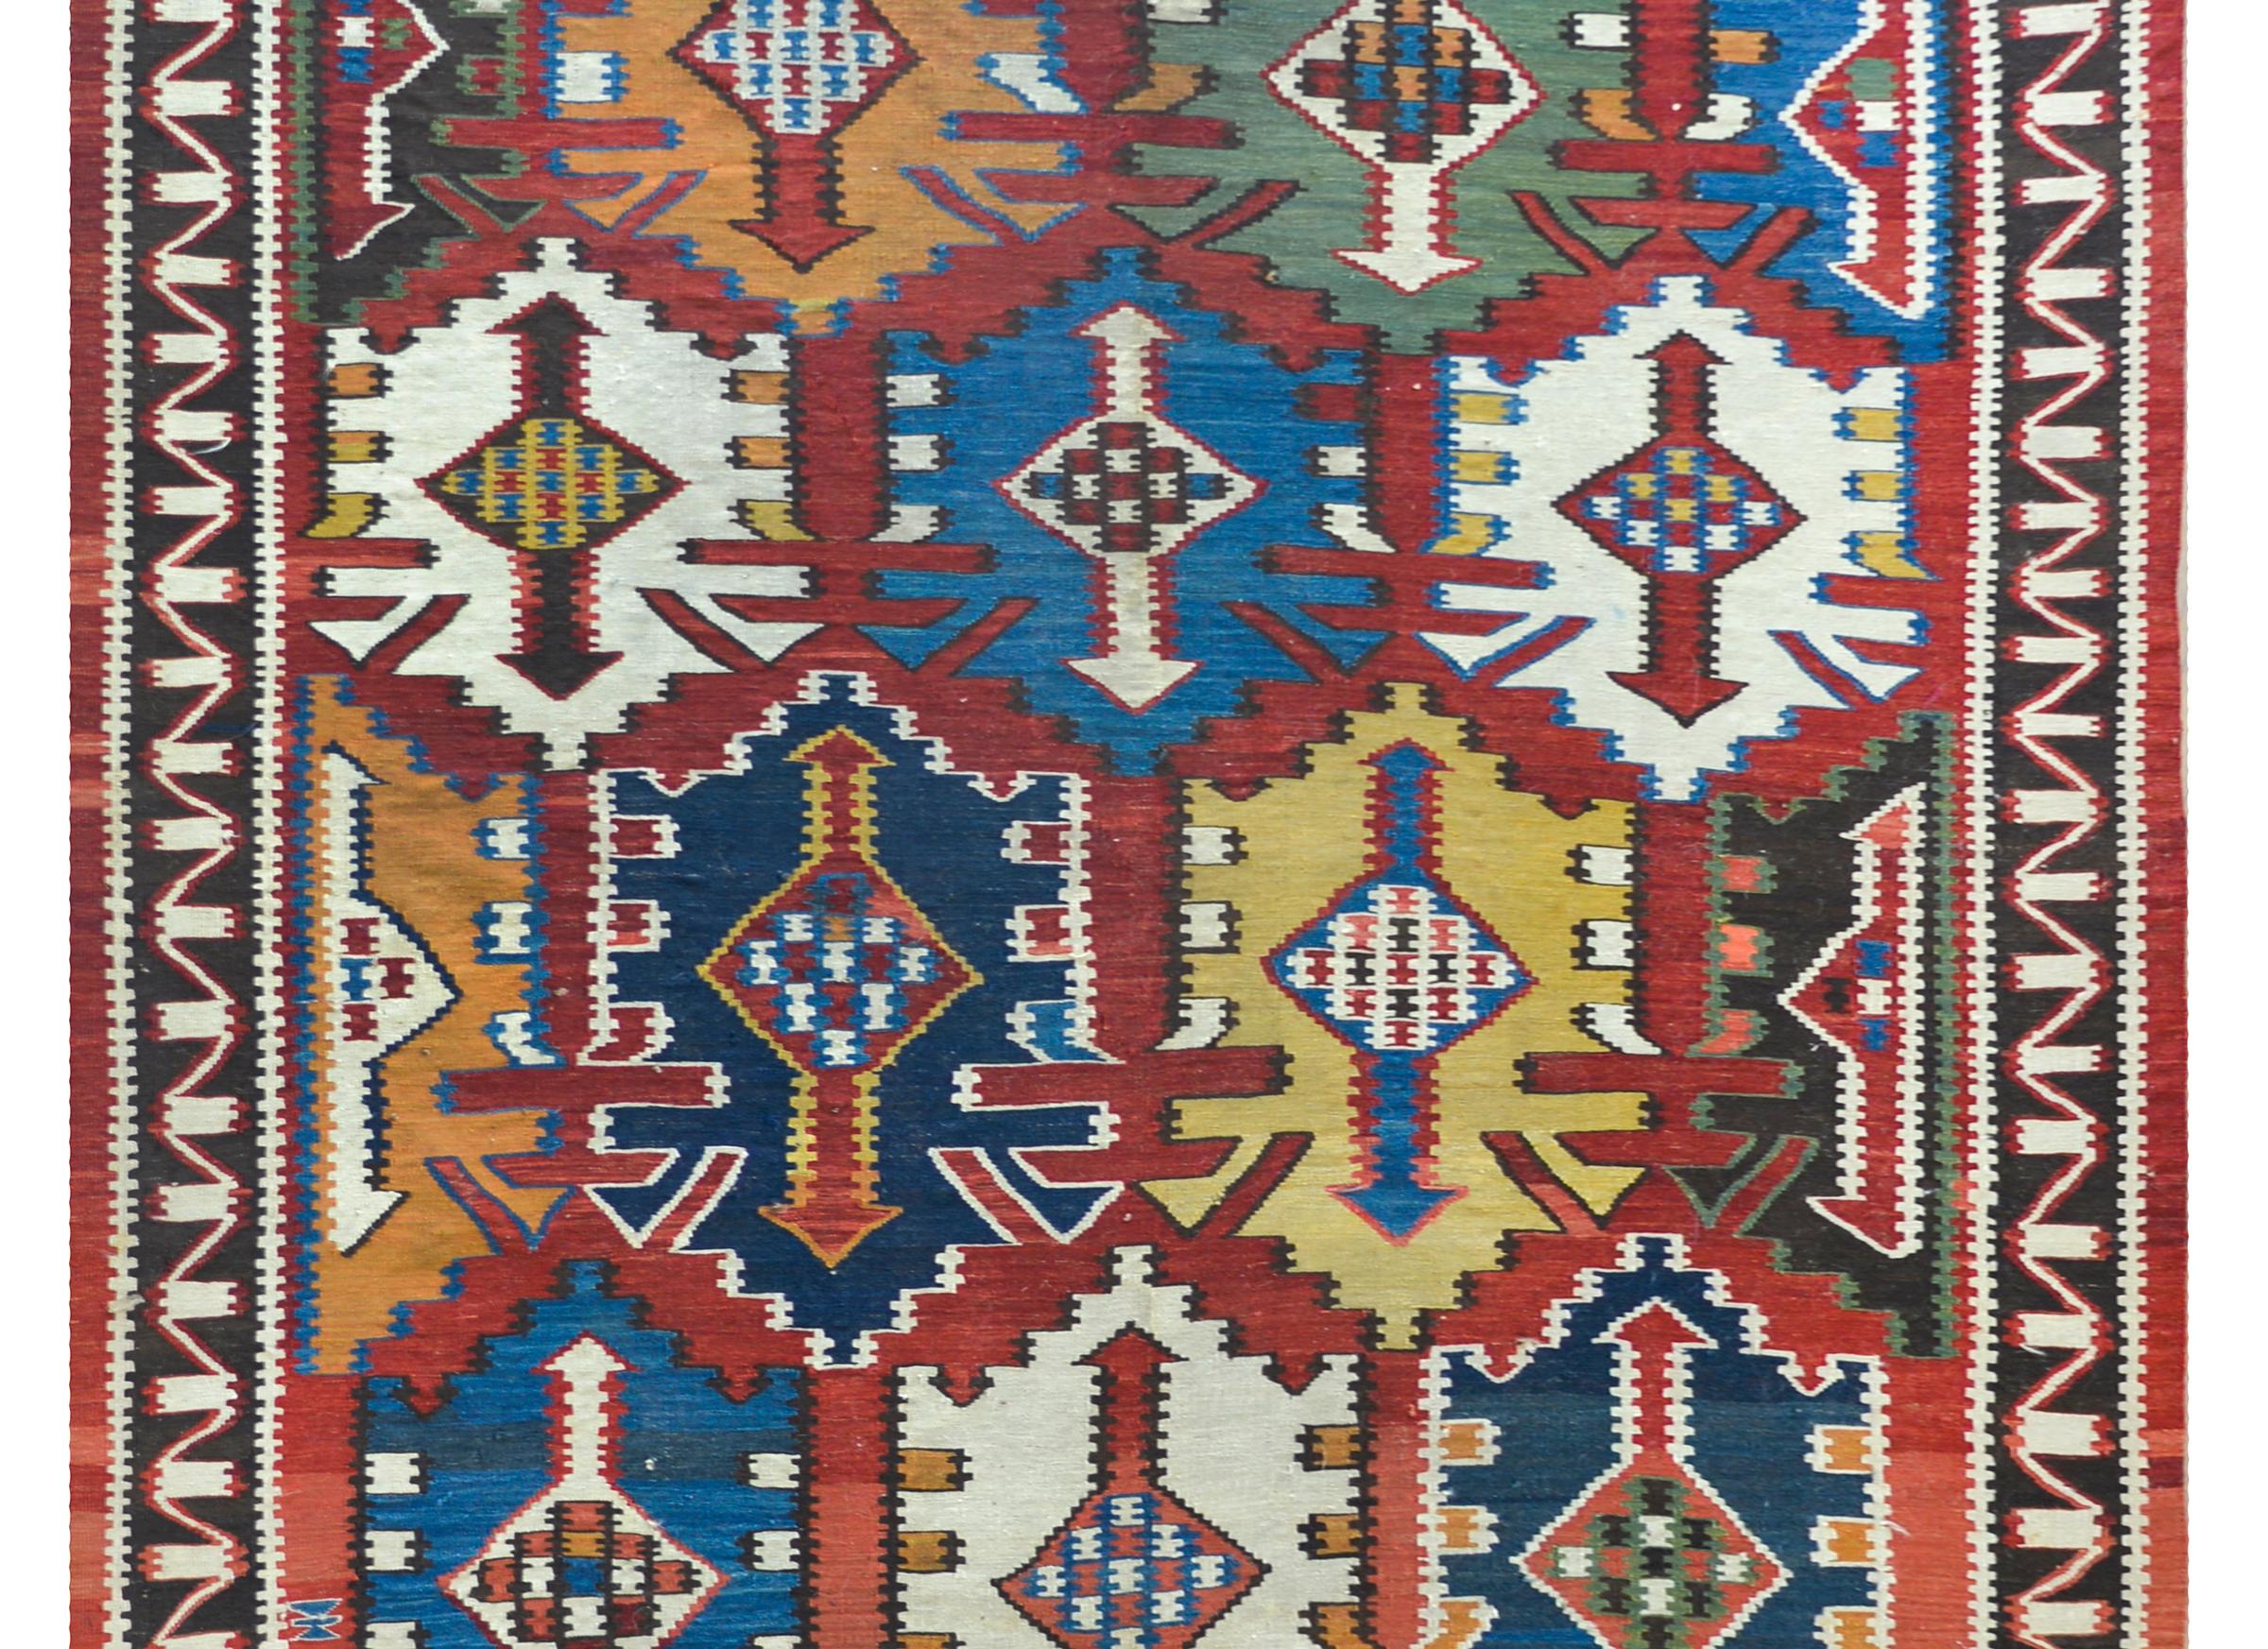 A rare and stunning early 20th century Persian Kuba kilim rug with a striking large-scale muli-colored stylized floral pattern against a crimson background, and surrounded by a striped border.